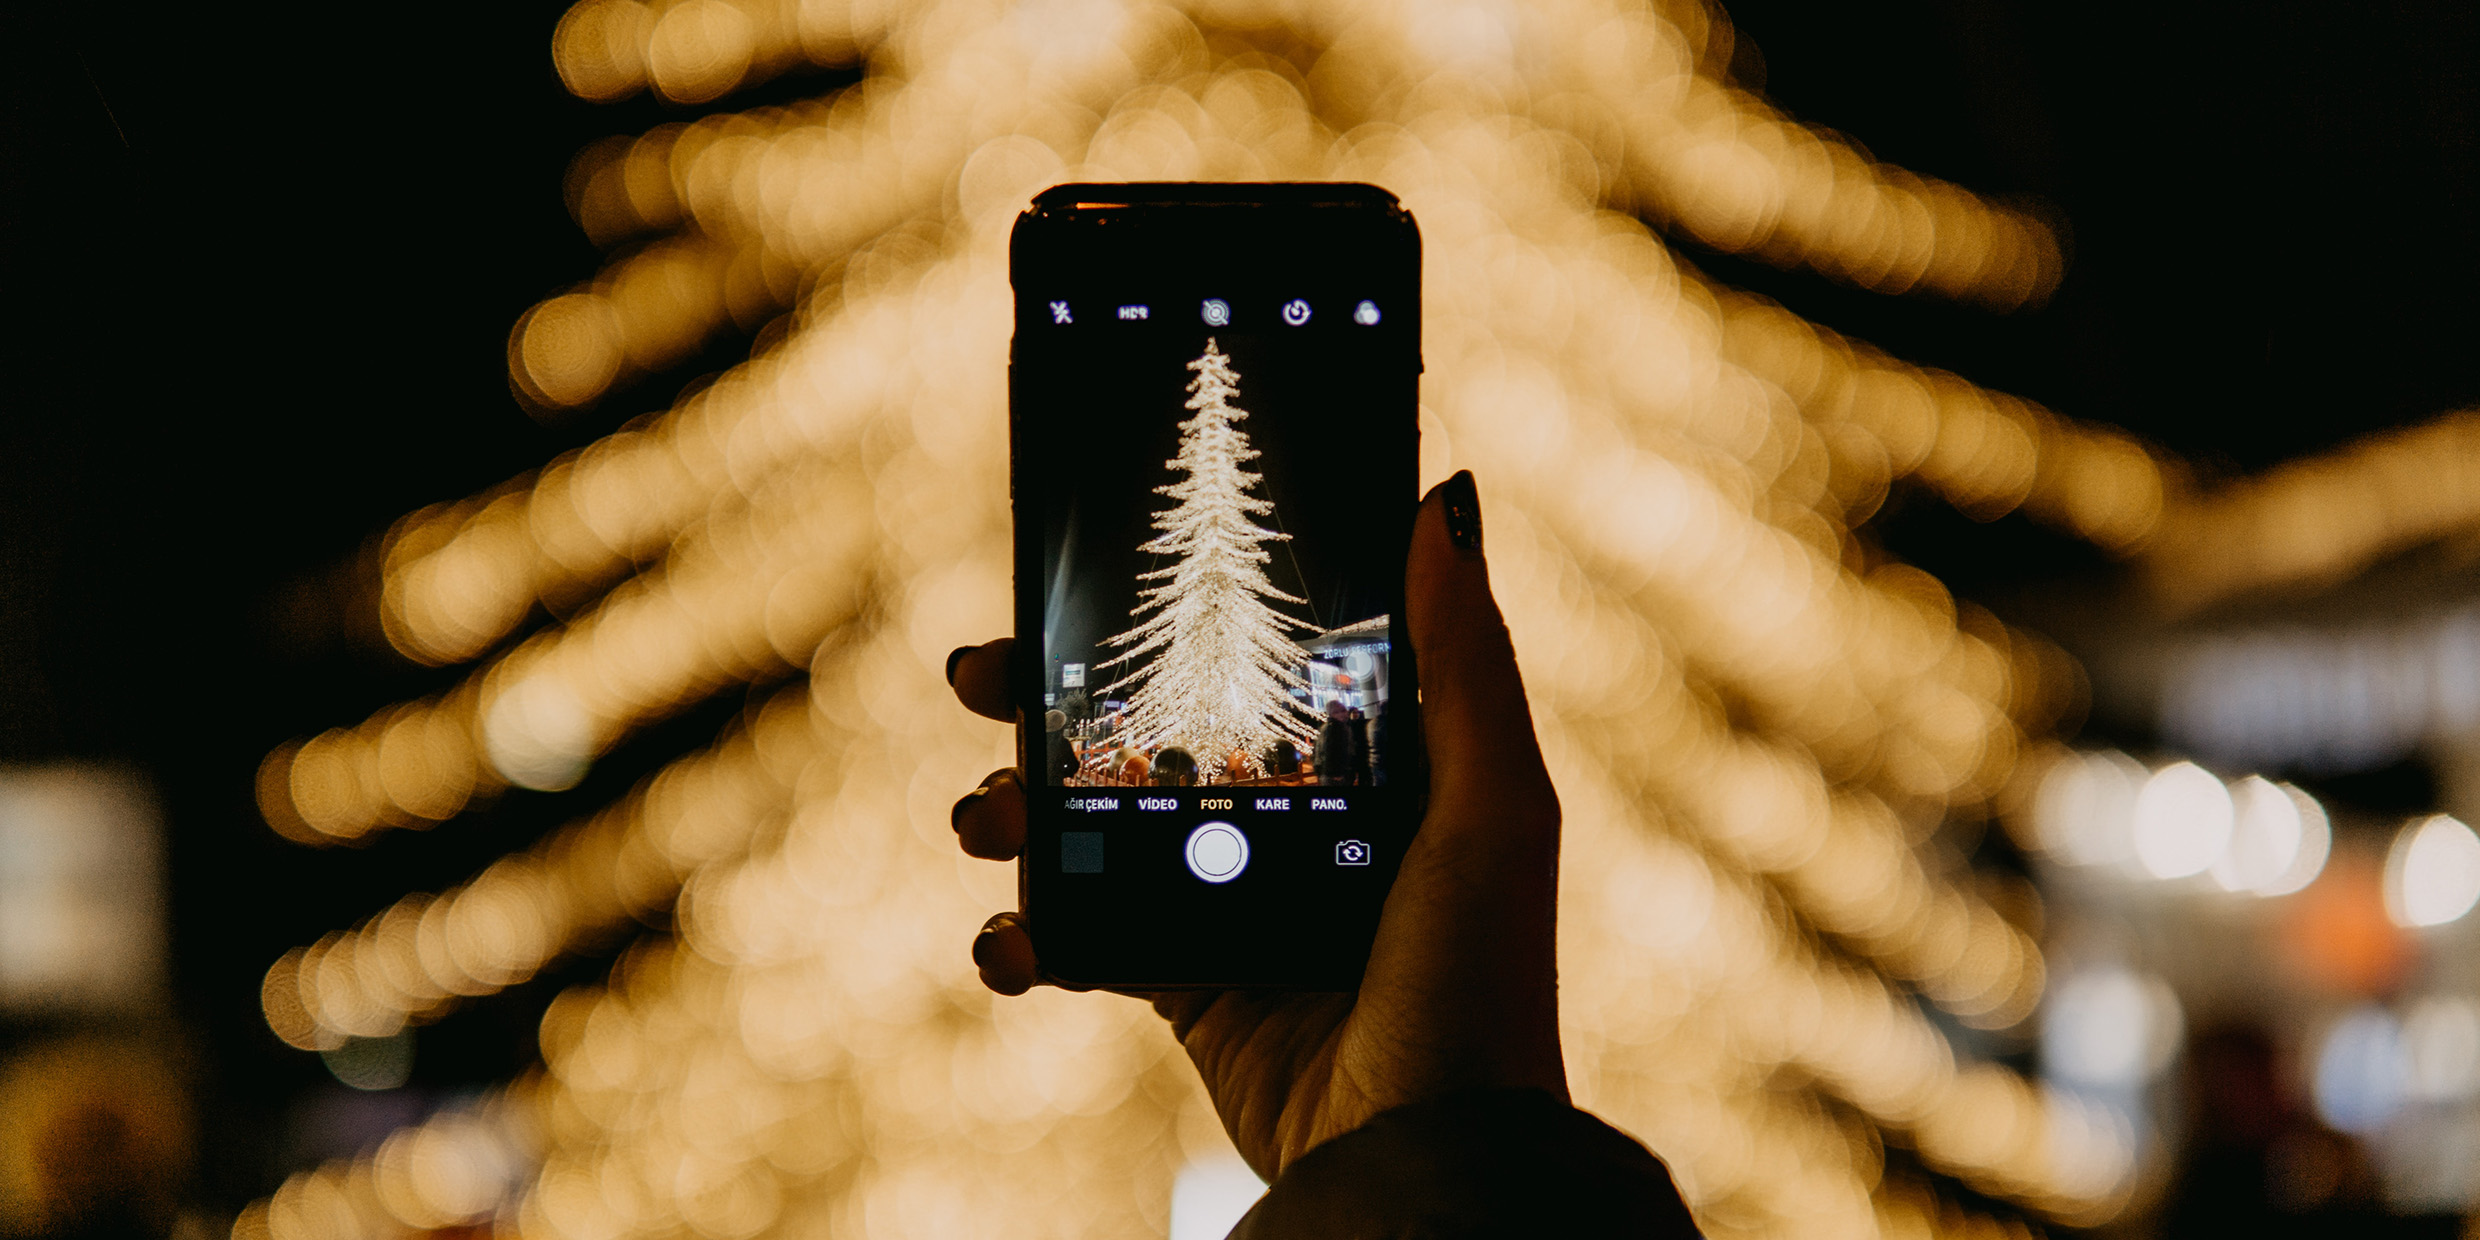 Image of a hand holding a mobile phone which is taking a photograph of a Christmas tree